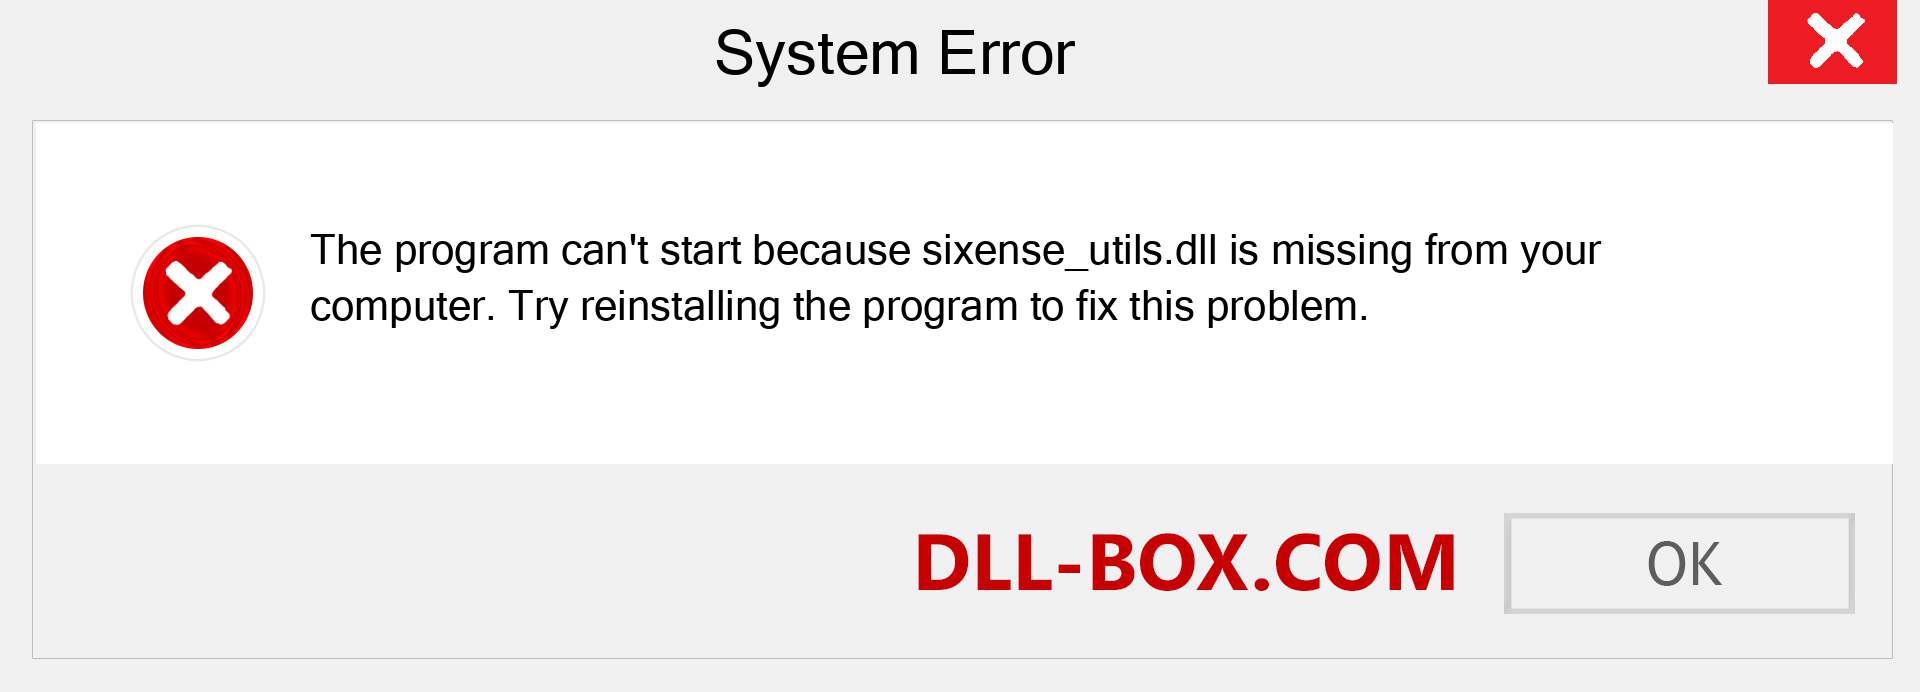  sixense_utils.dll file is missing?. Download for Windows 7, 8, 10 - Fix  sixense_utils dll Missing Error on Windows, photos, images